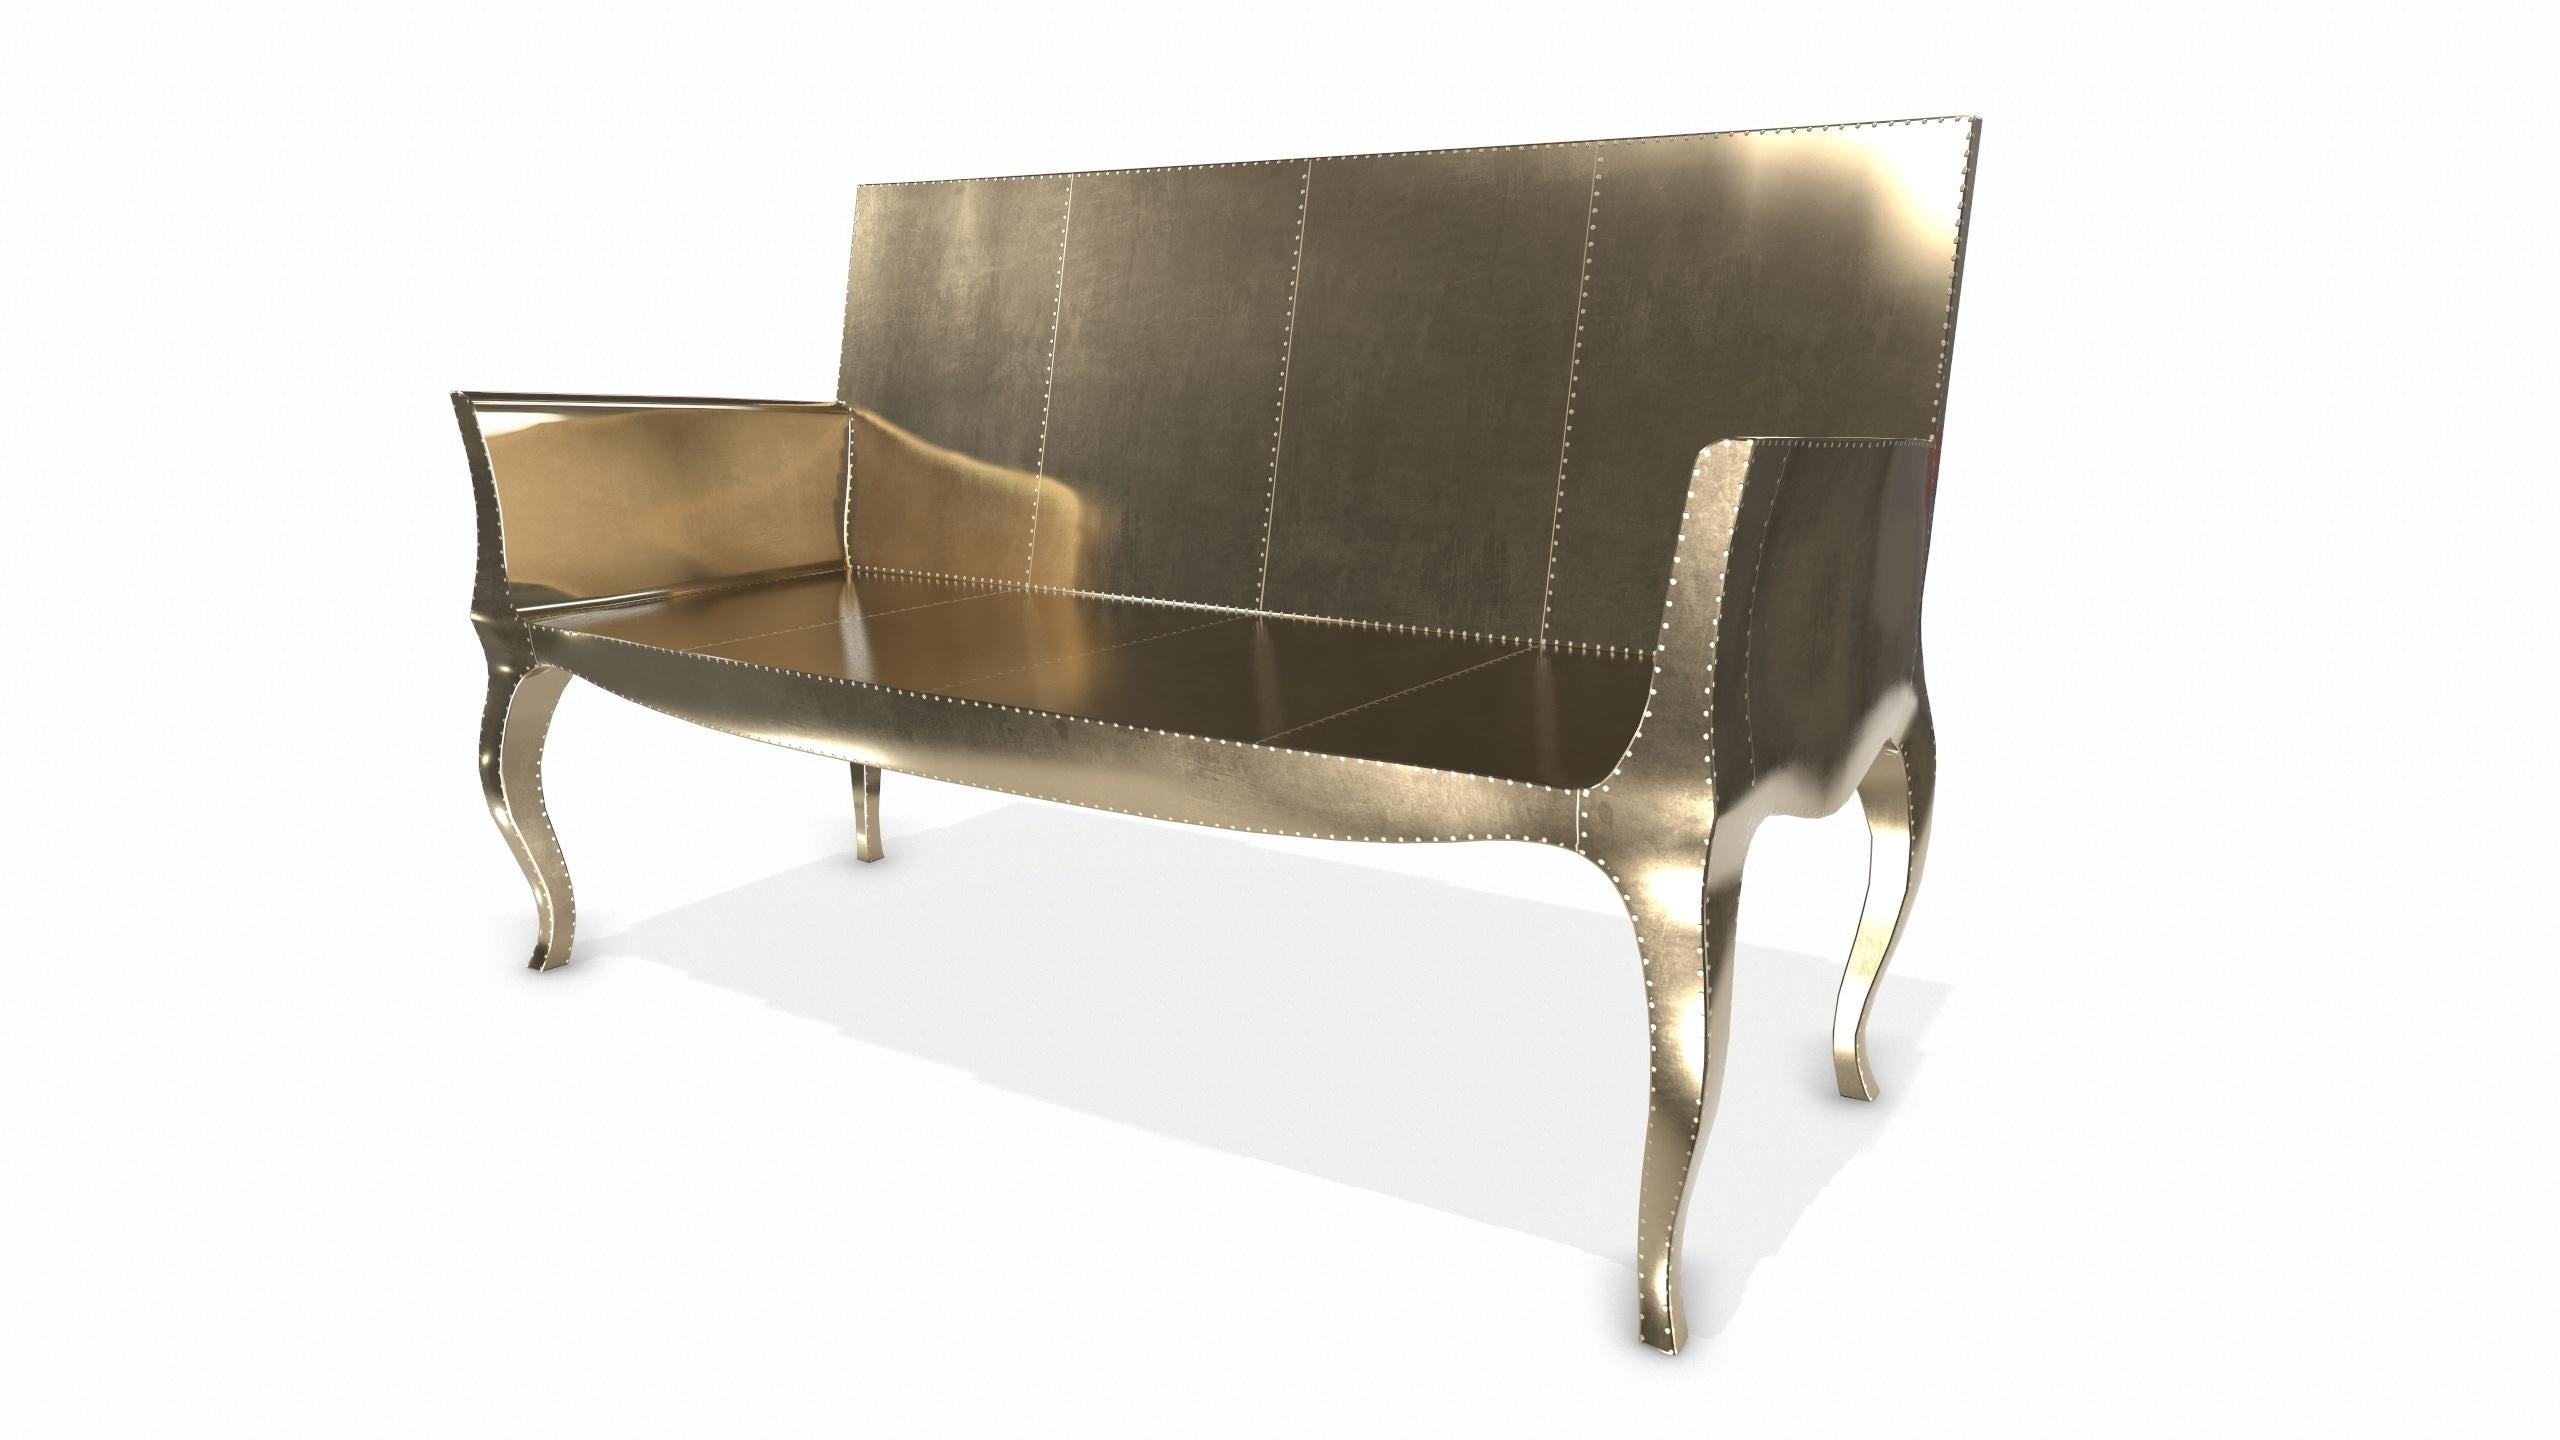 American Louise Settee Art Deco Lounge Chairs in Smooth Brass by Paul Mathieu For Sale